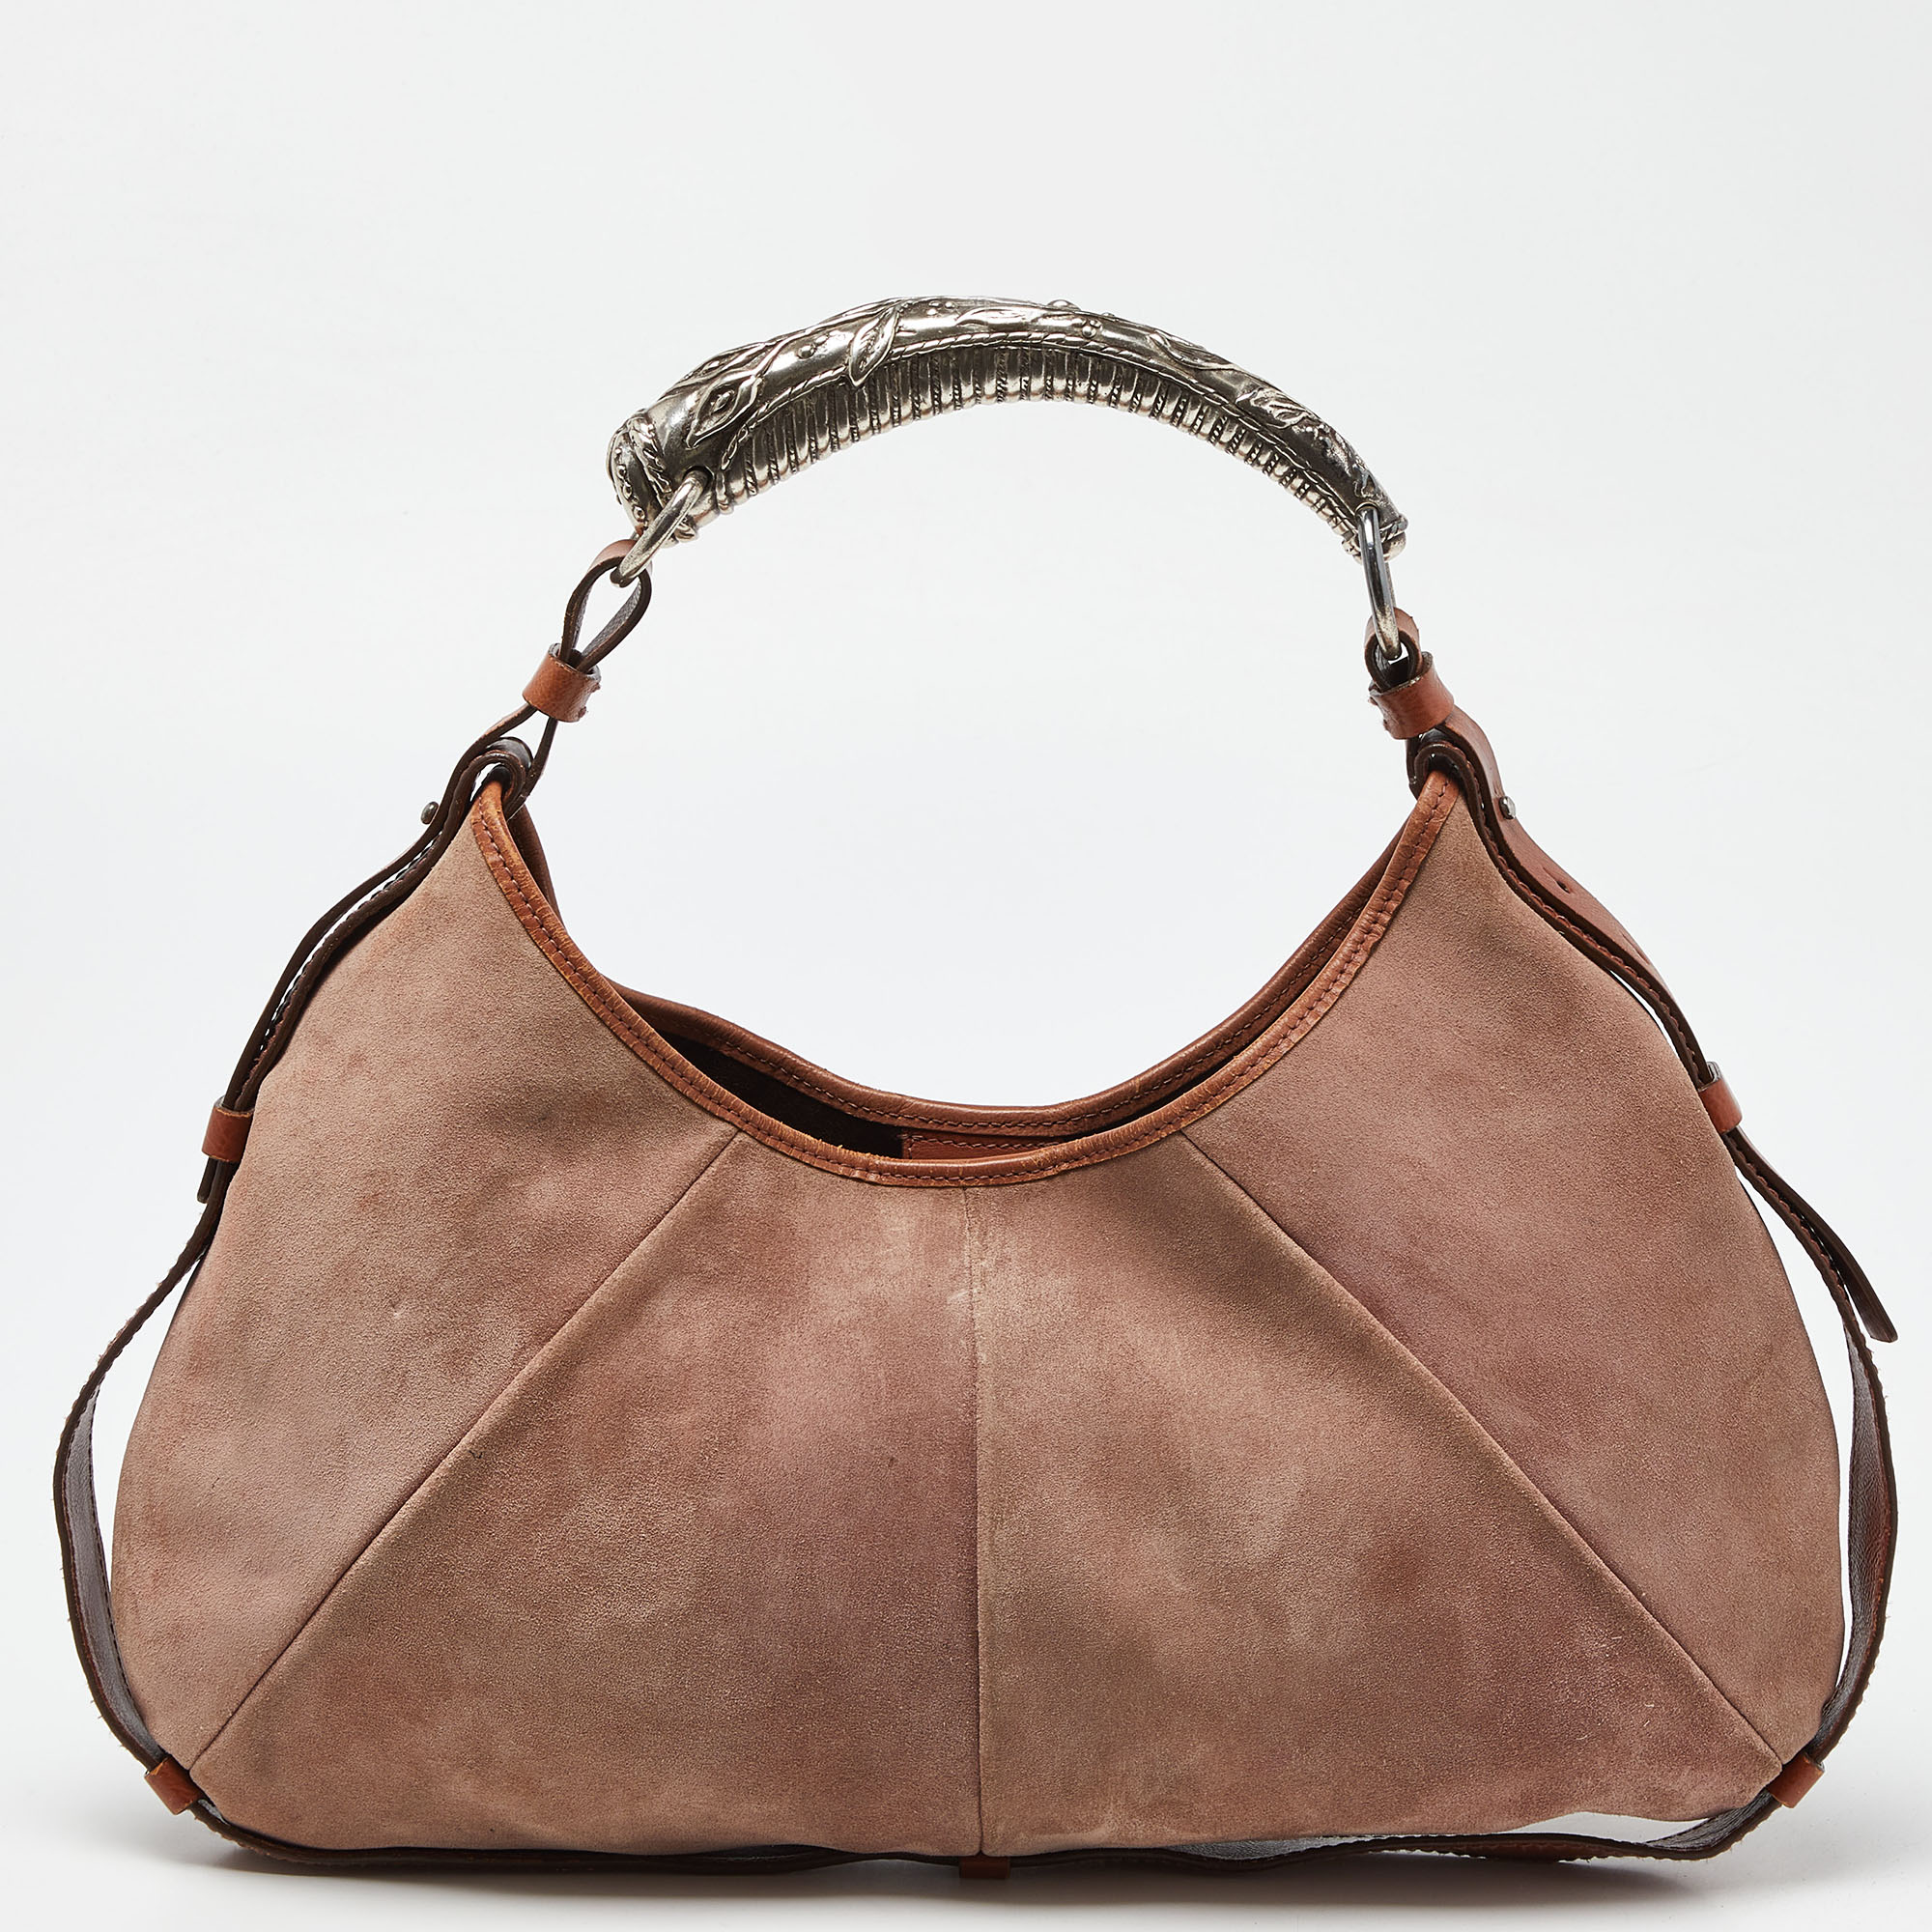 Yves saint laurent old rose/brown suede and leather mombasa horn hobo